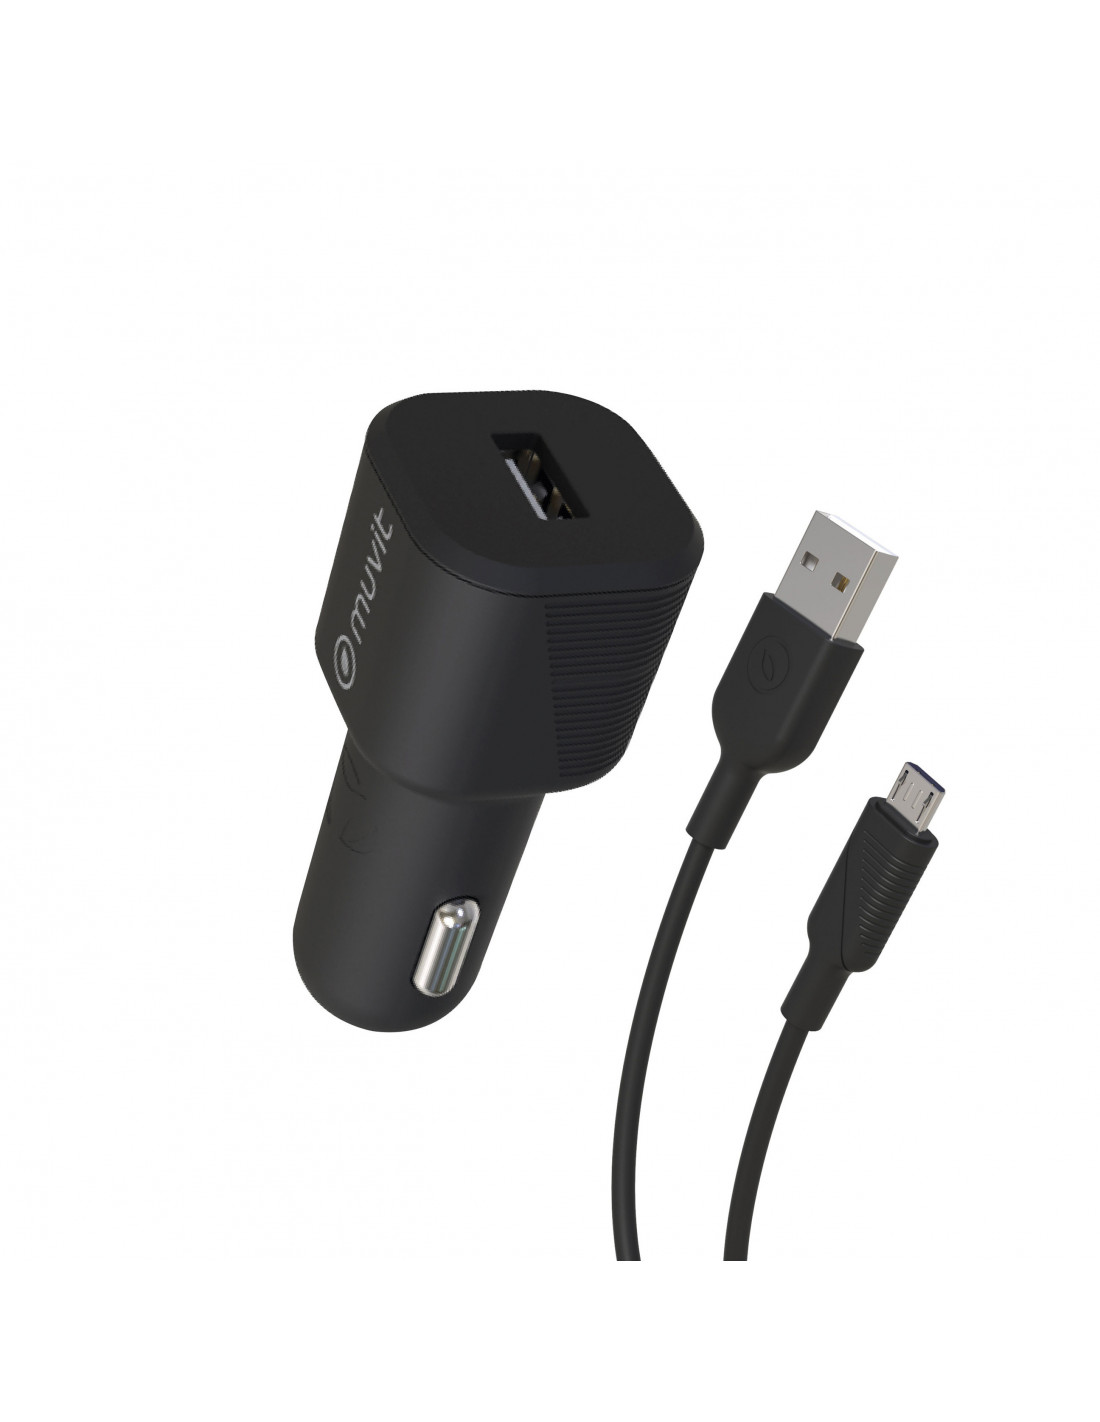 muvit for change pack cargador coche USB 2.4A 12W + cable Micro